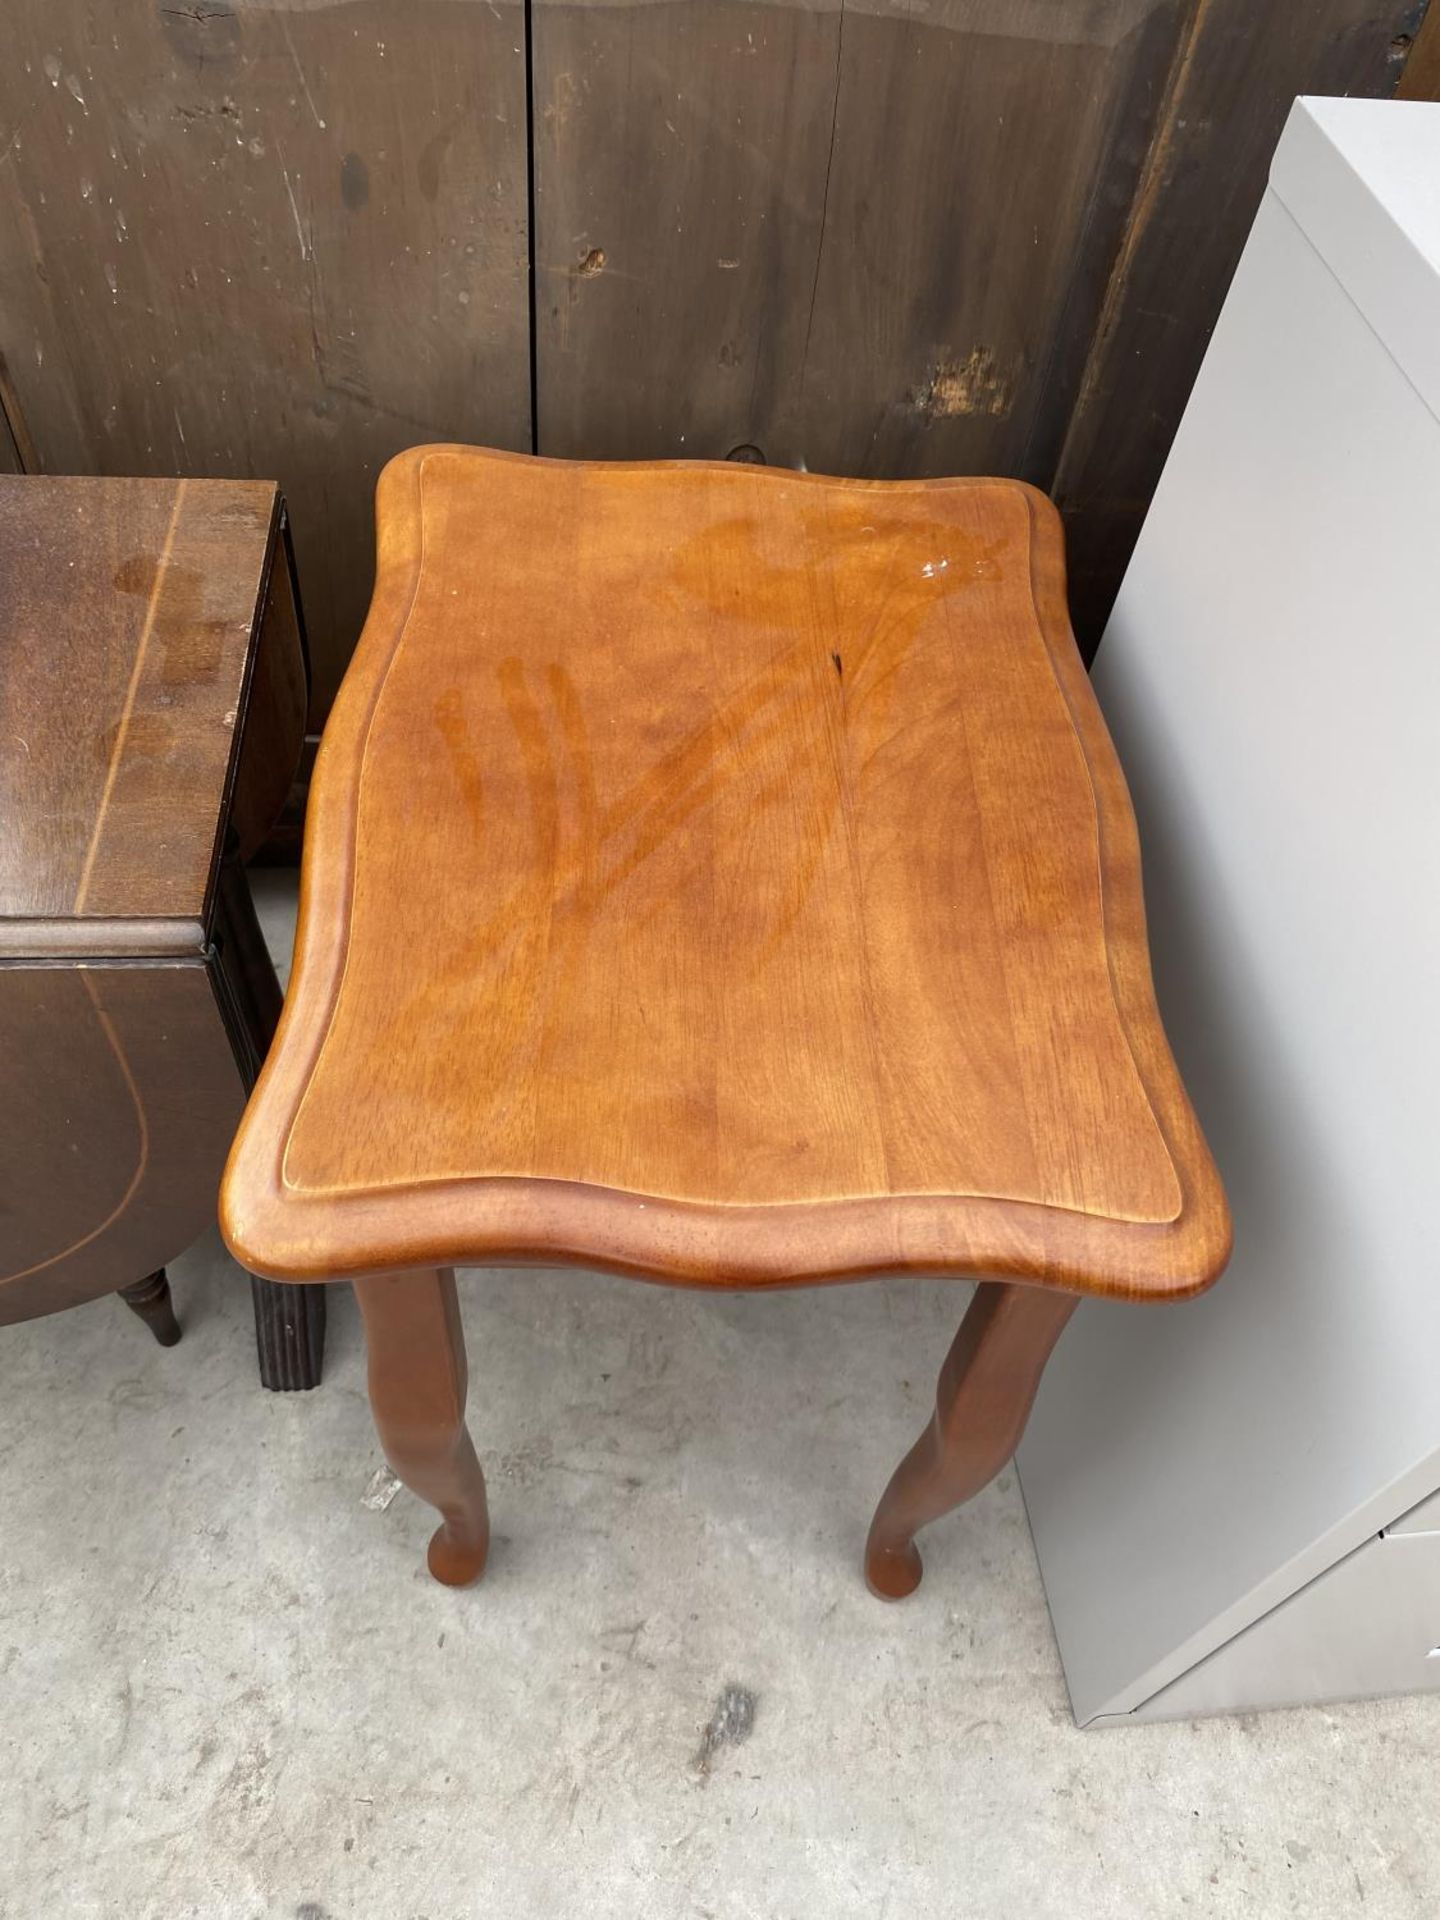 A REPRODUCTION DROP-LEAF TABLE AND LAMP TABLE - Image 2 of 3